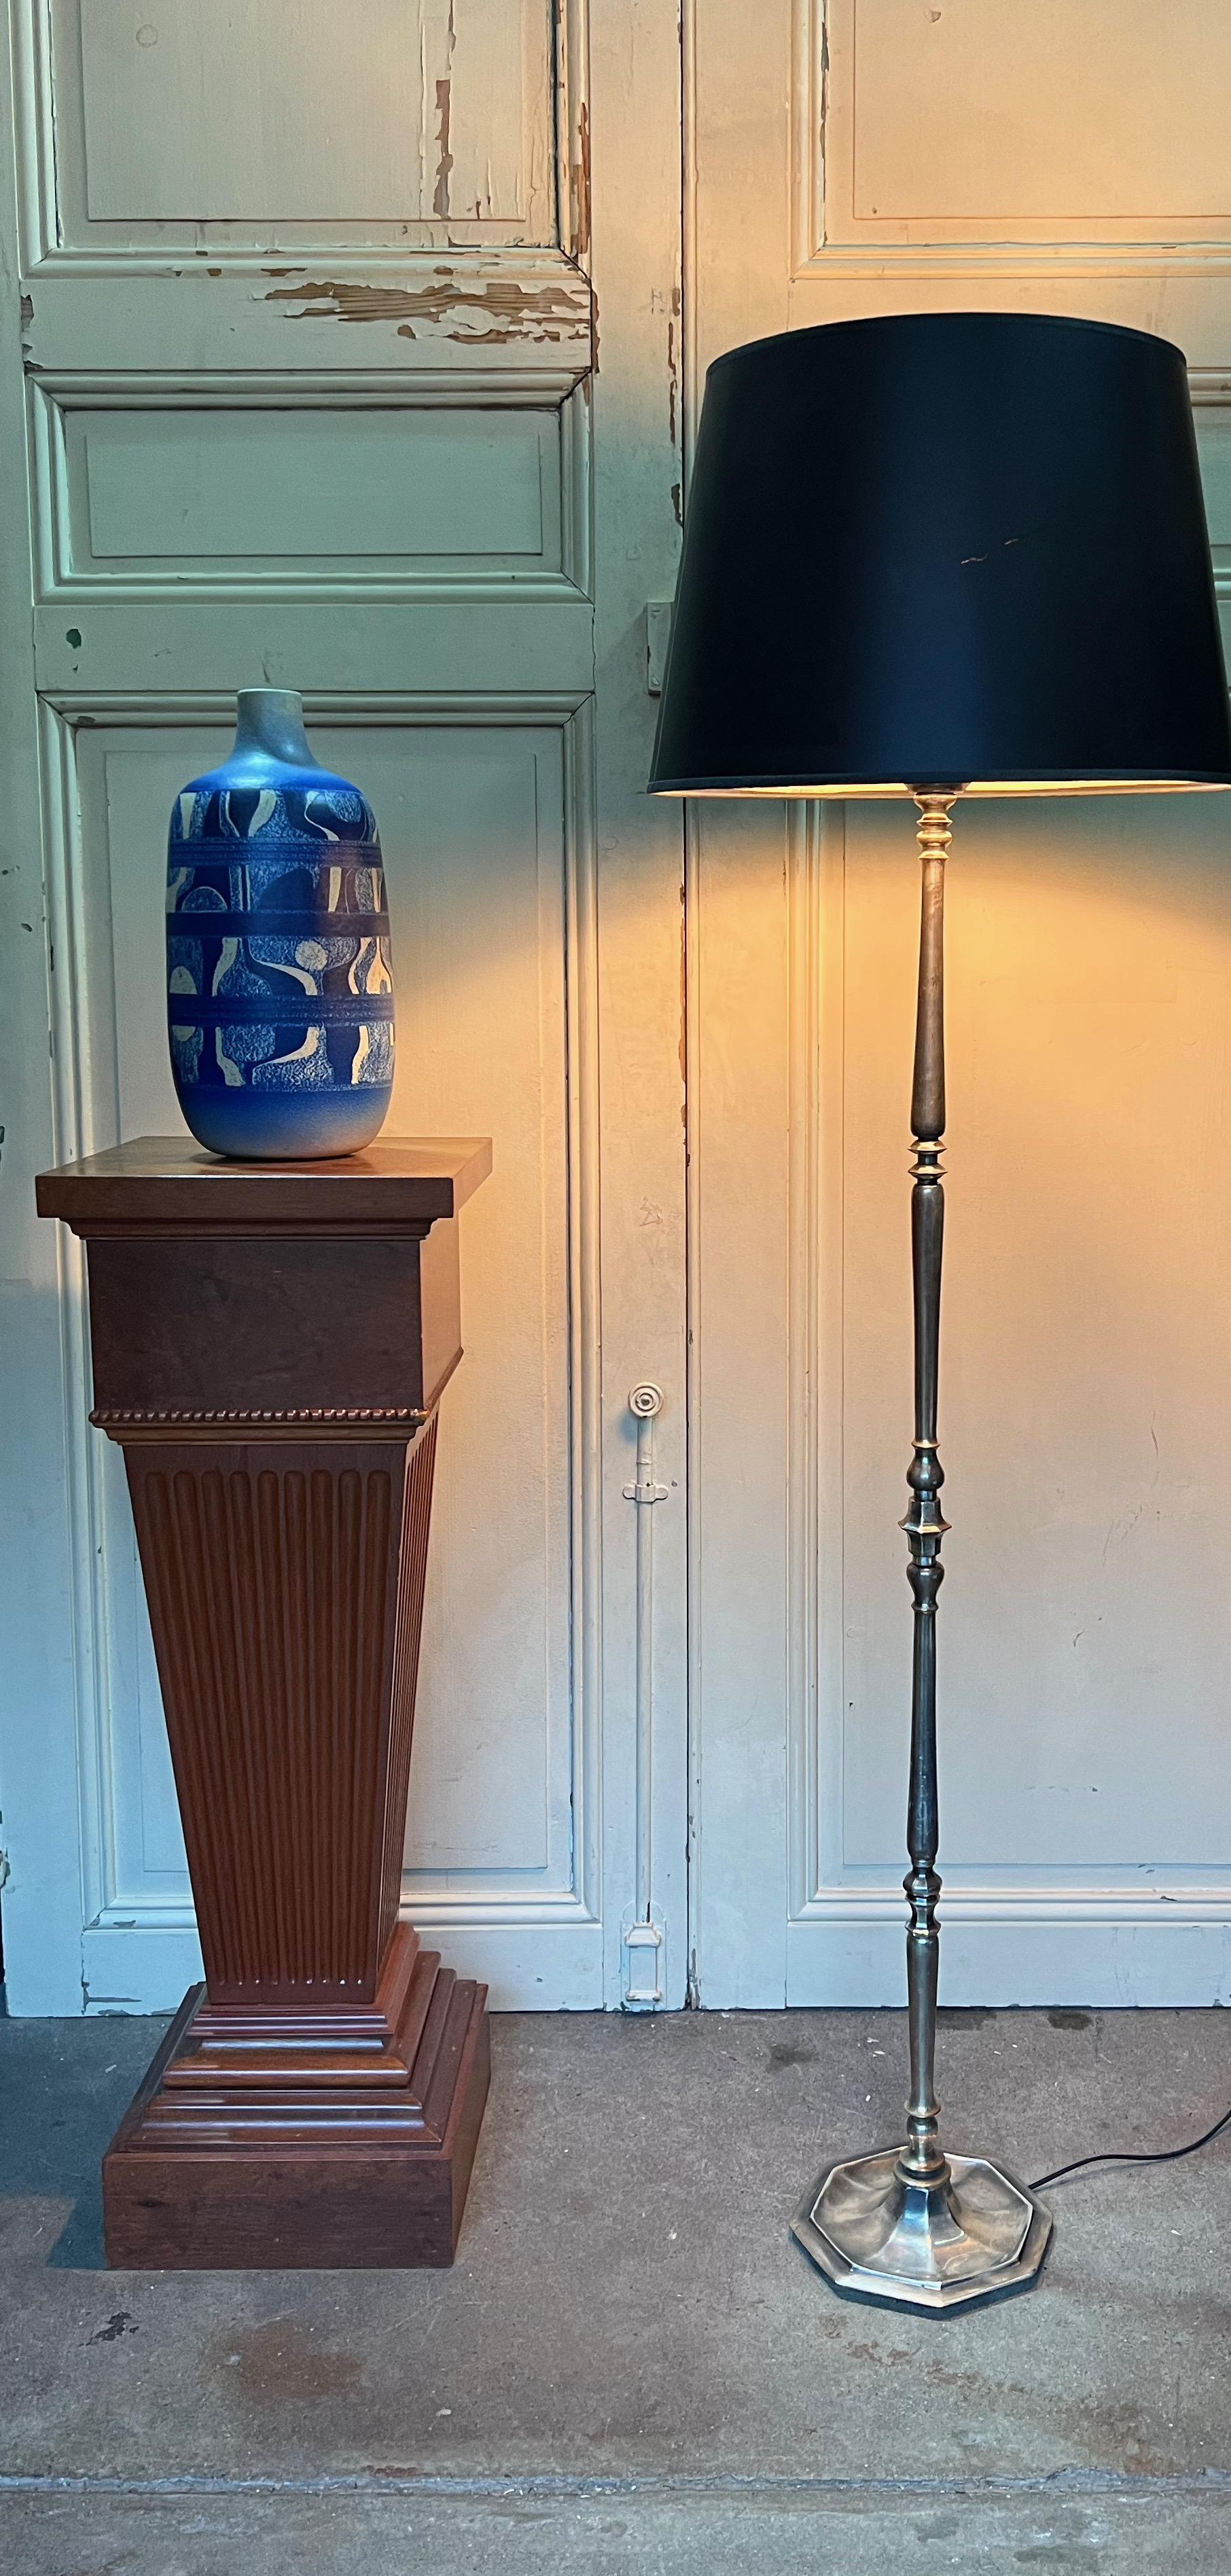 Presenting an elegant and slender French silver plated brass floor lamp from the 1940s. The lamp has undergone meticulous hand polishing, unveiling its rich silver tones while maintaining the subtle nuances that reflect its age and history. Recently